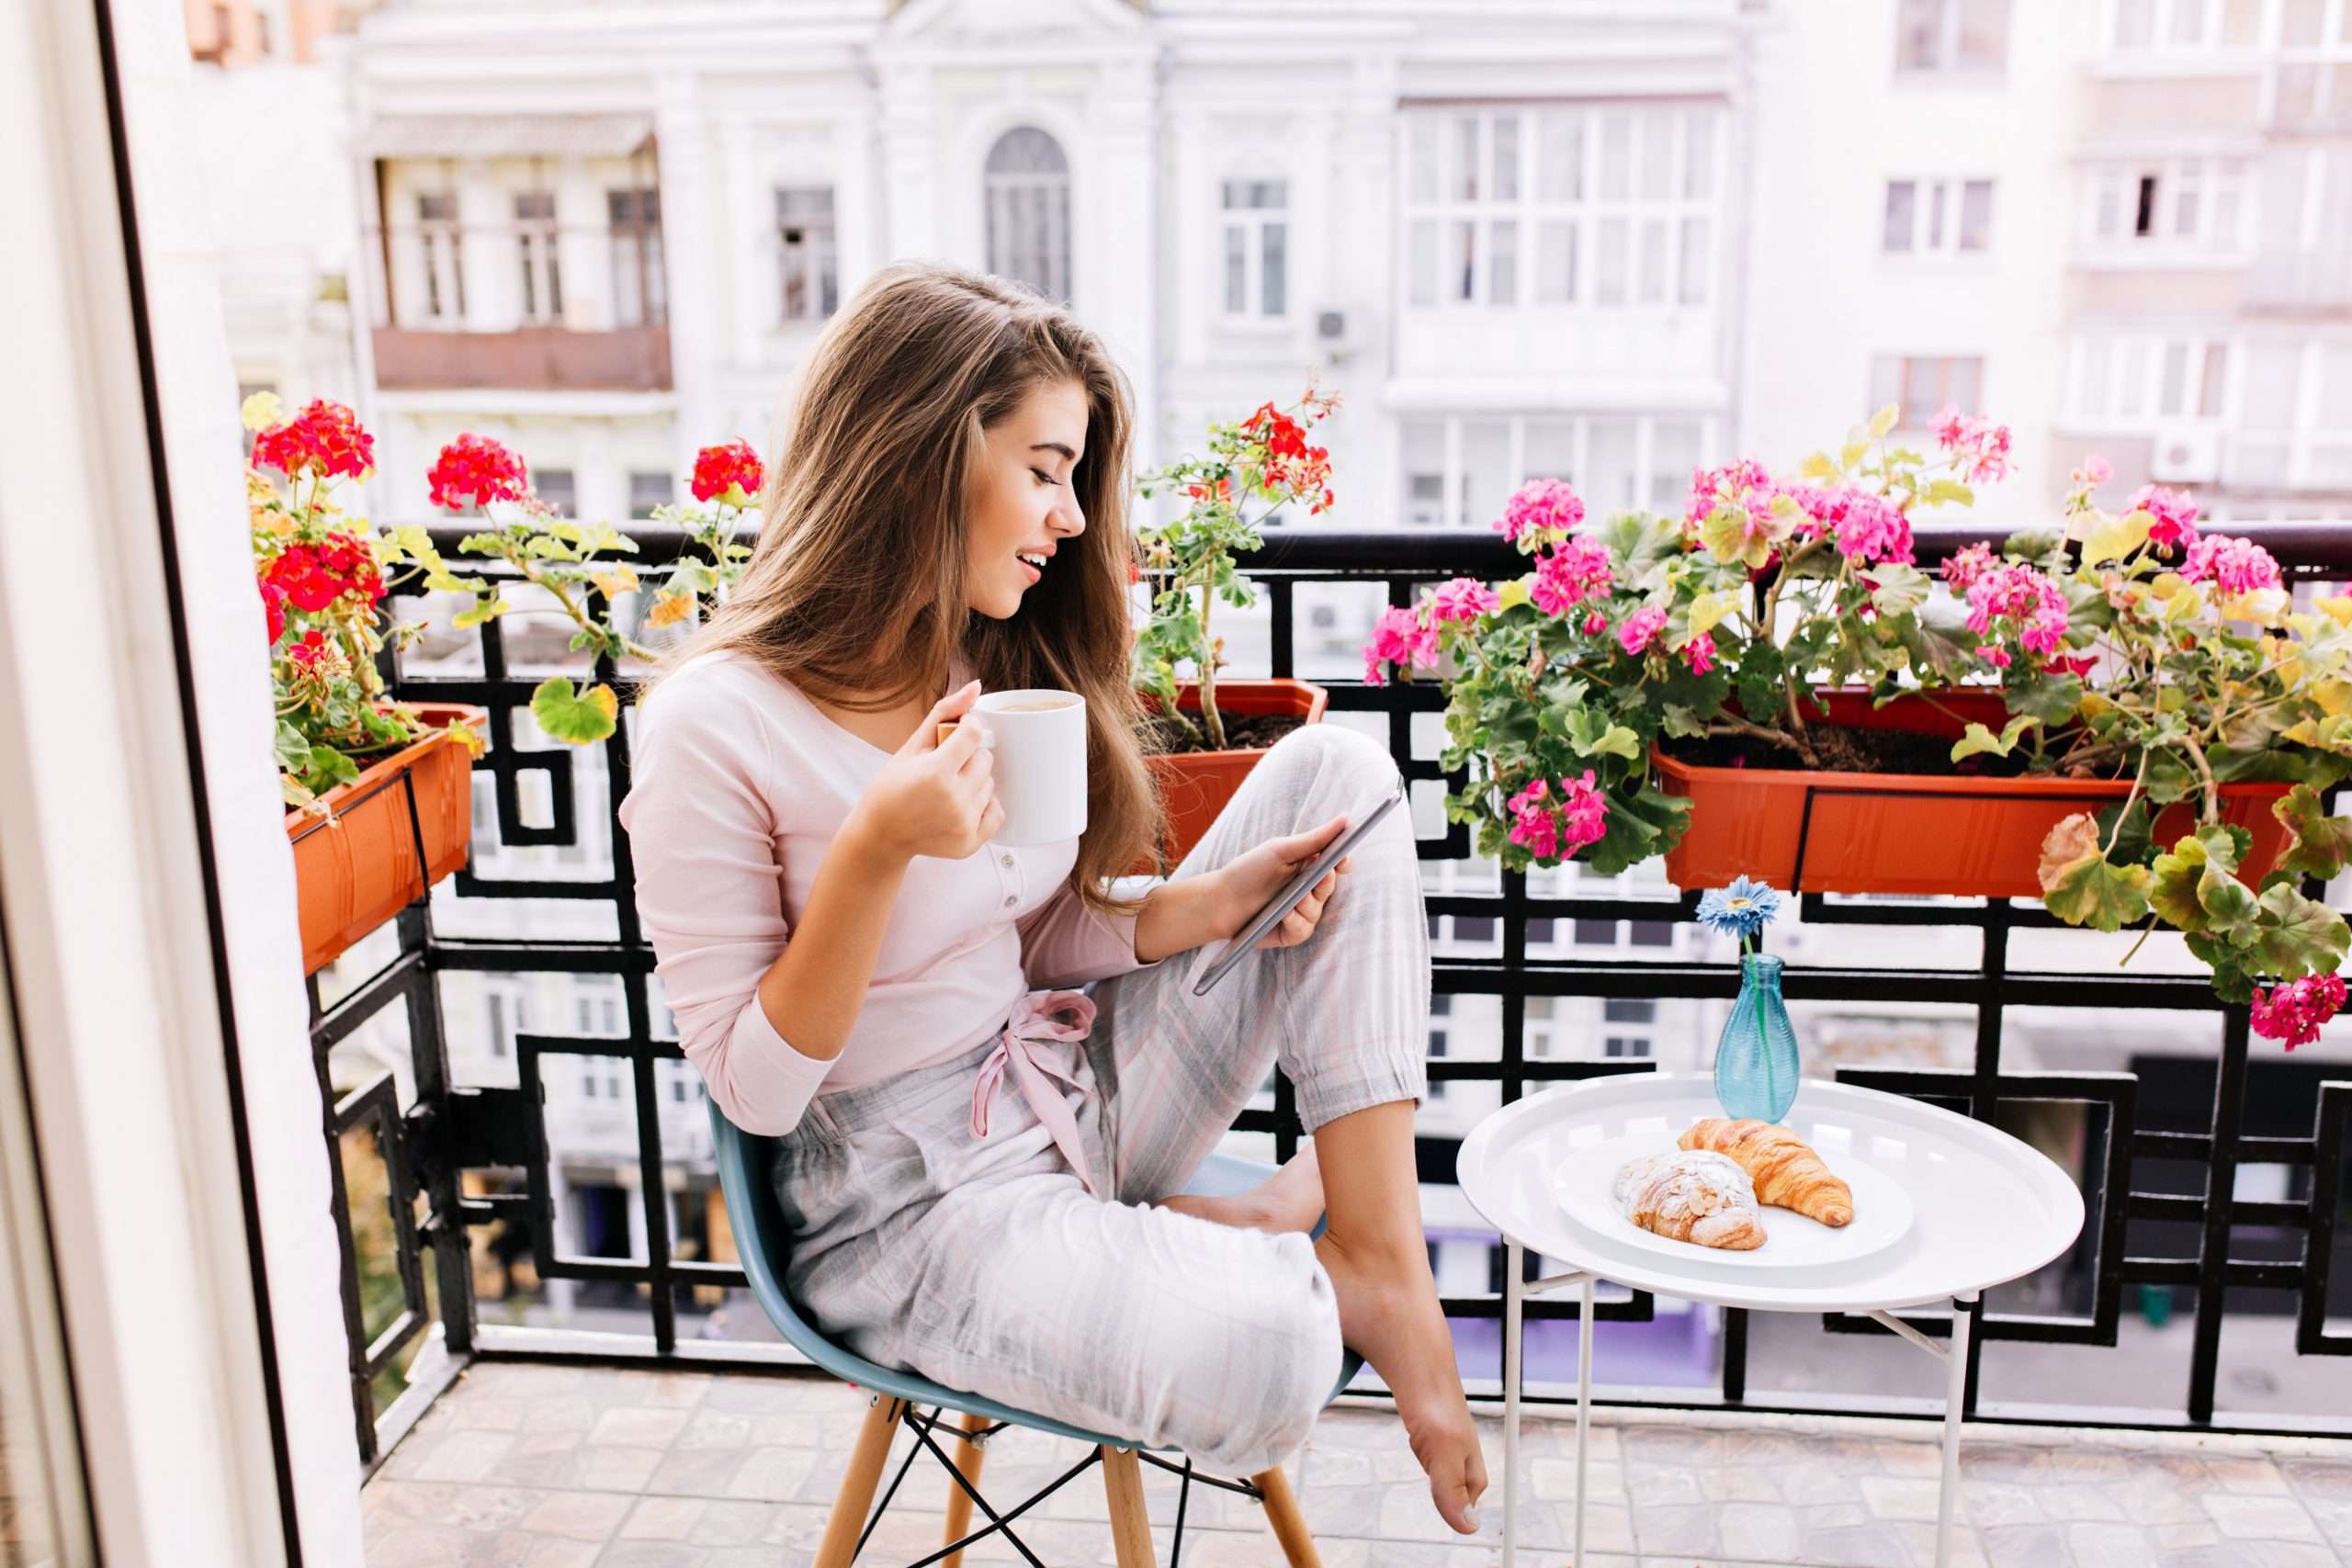 Attractive girl with long hair in pajama having breakfast on balcony in the morning in city. She holds a cup, reading on tablet.